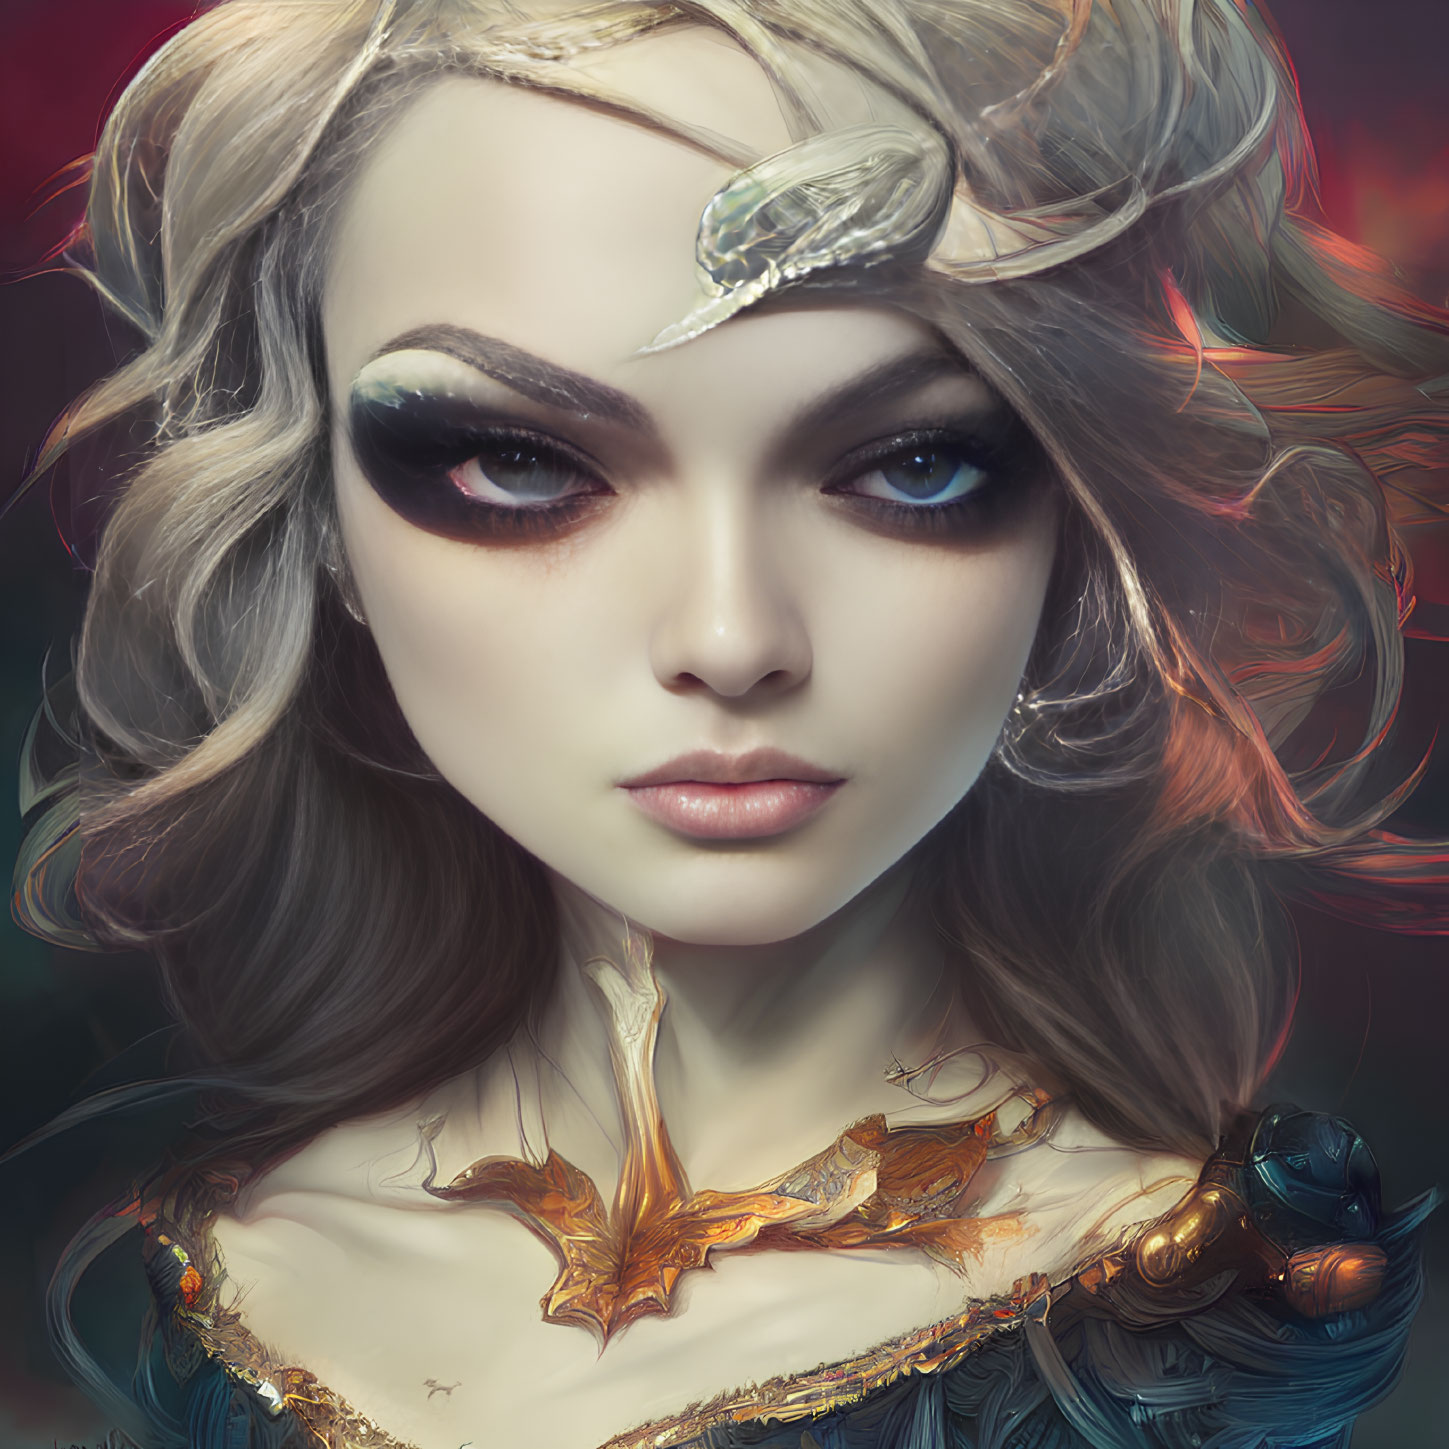 Fantasy-themed digital portrait of a woman with flowing hair and ornate shoulder armor.